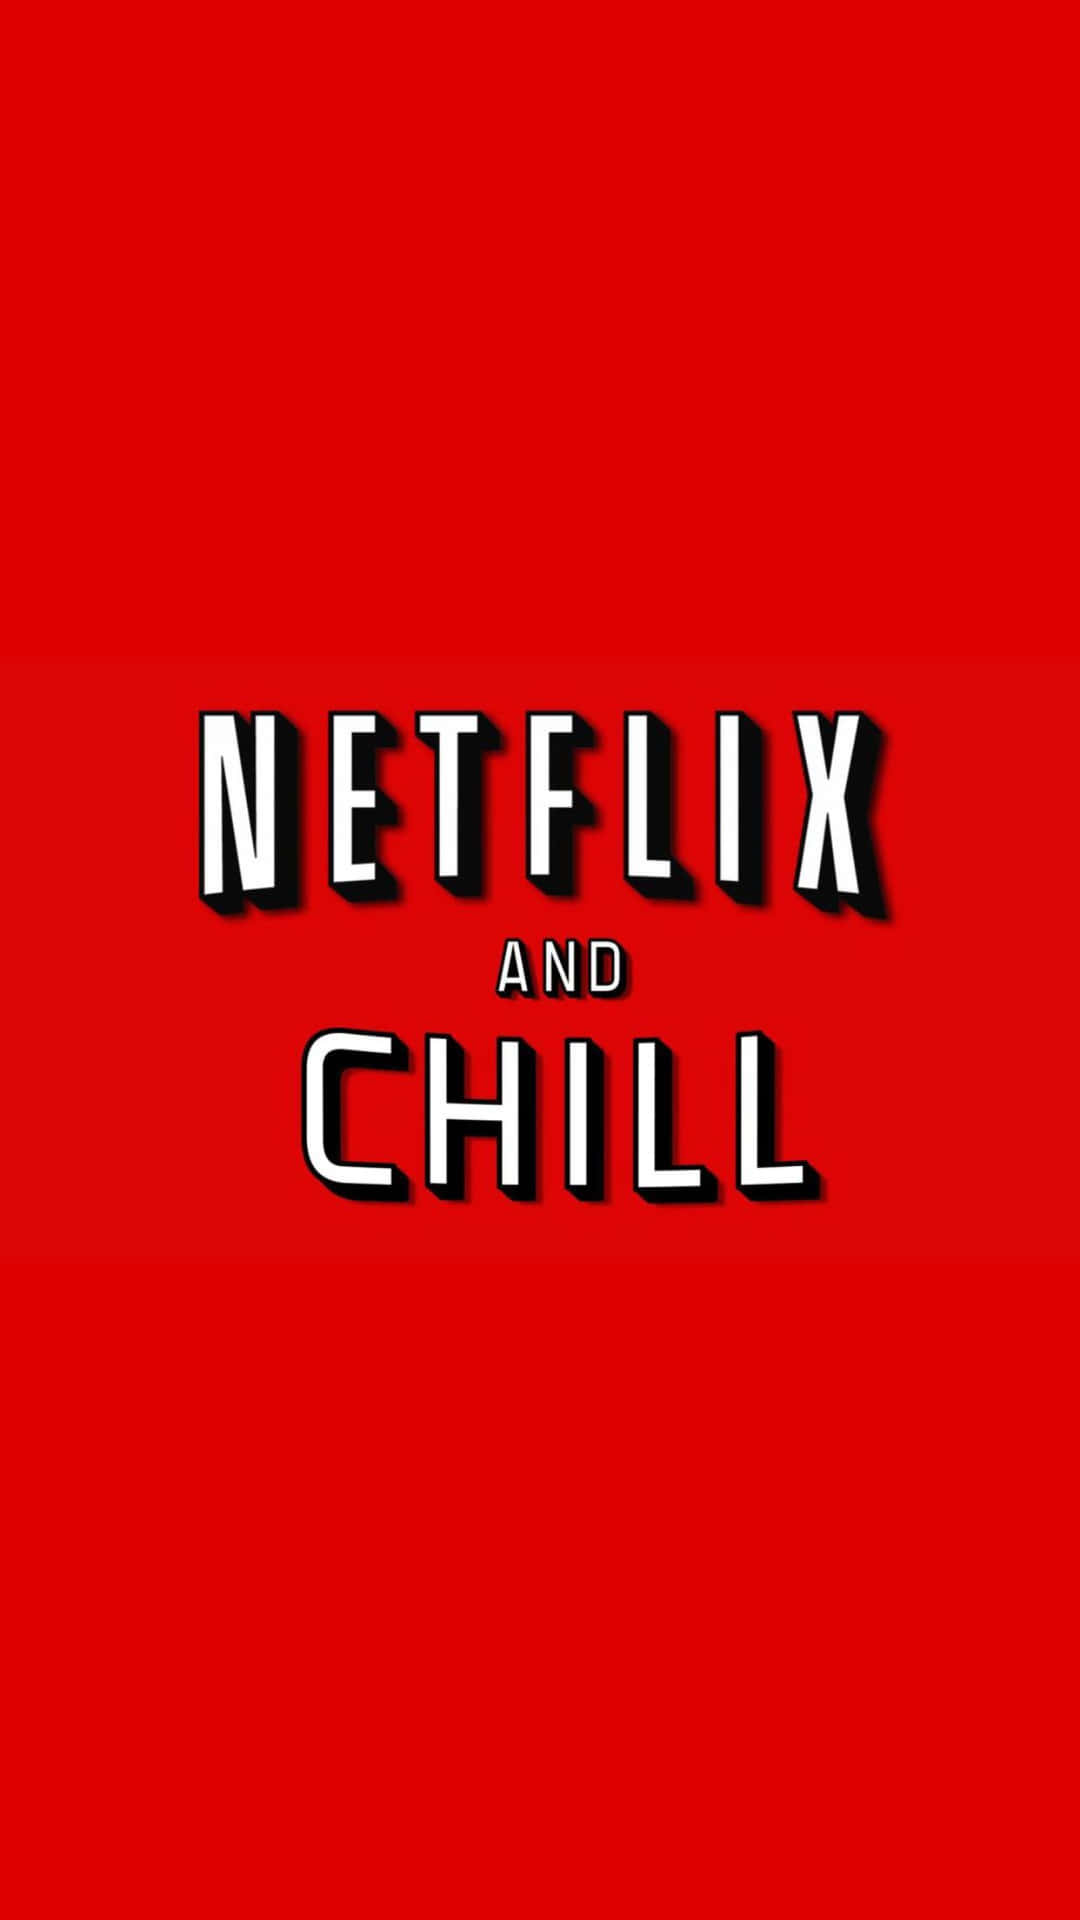 Netflix And Chill Aesthetic Wallpaper